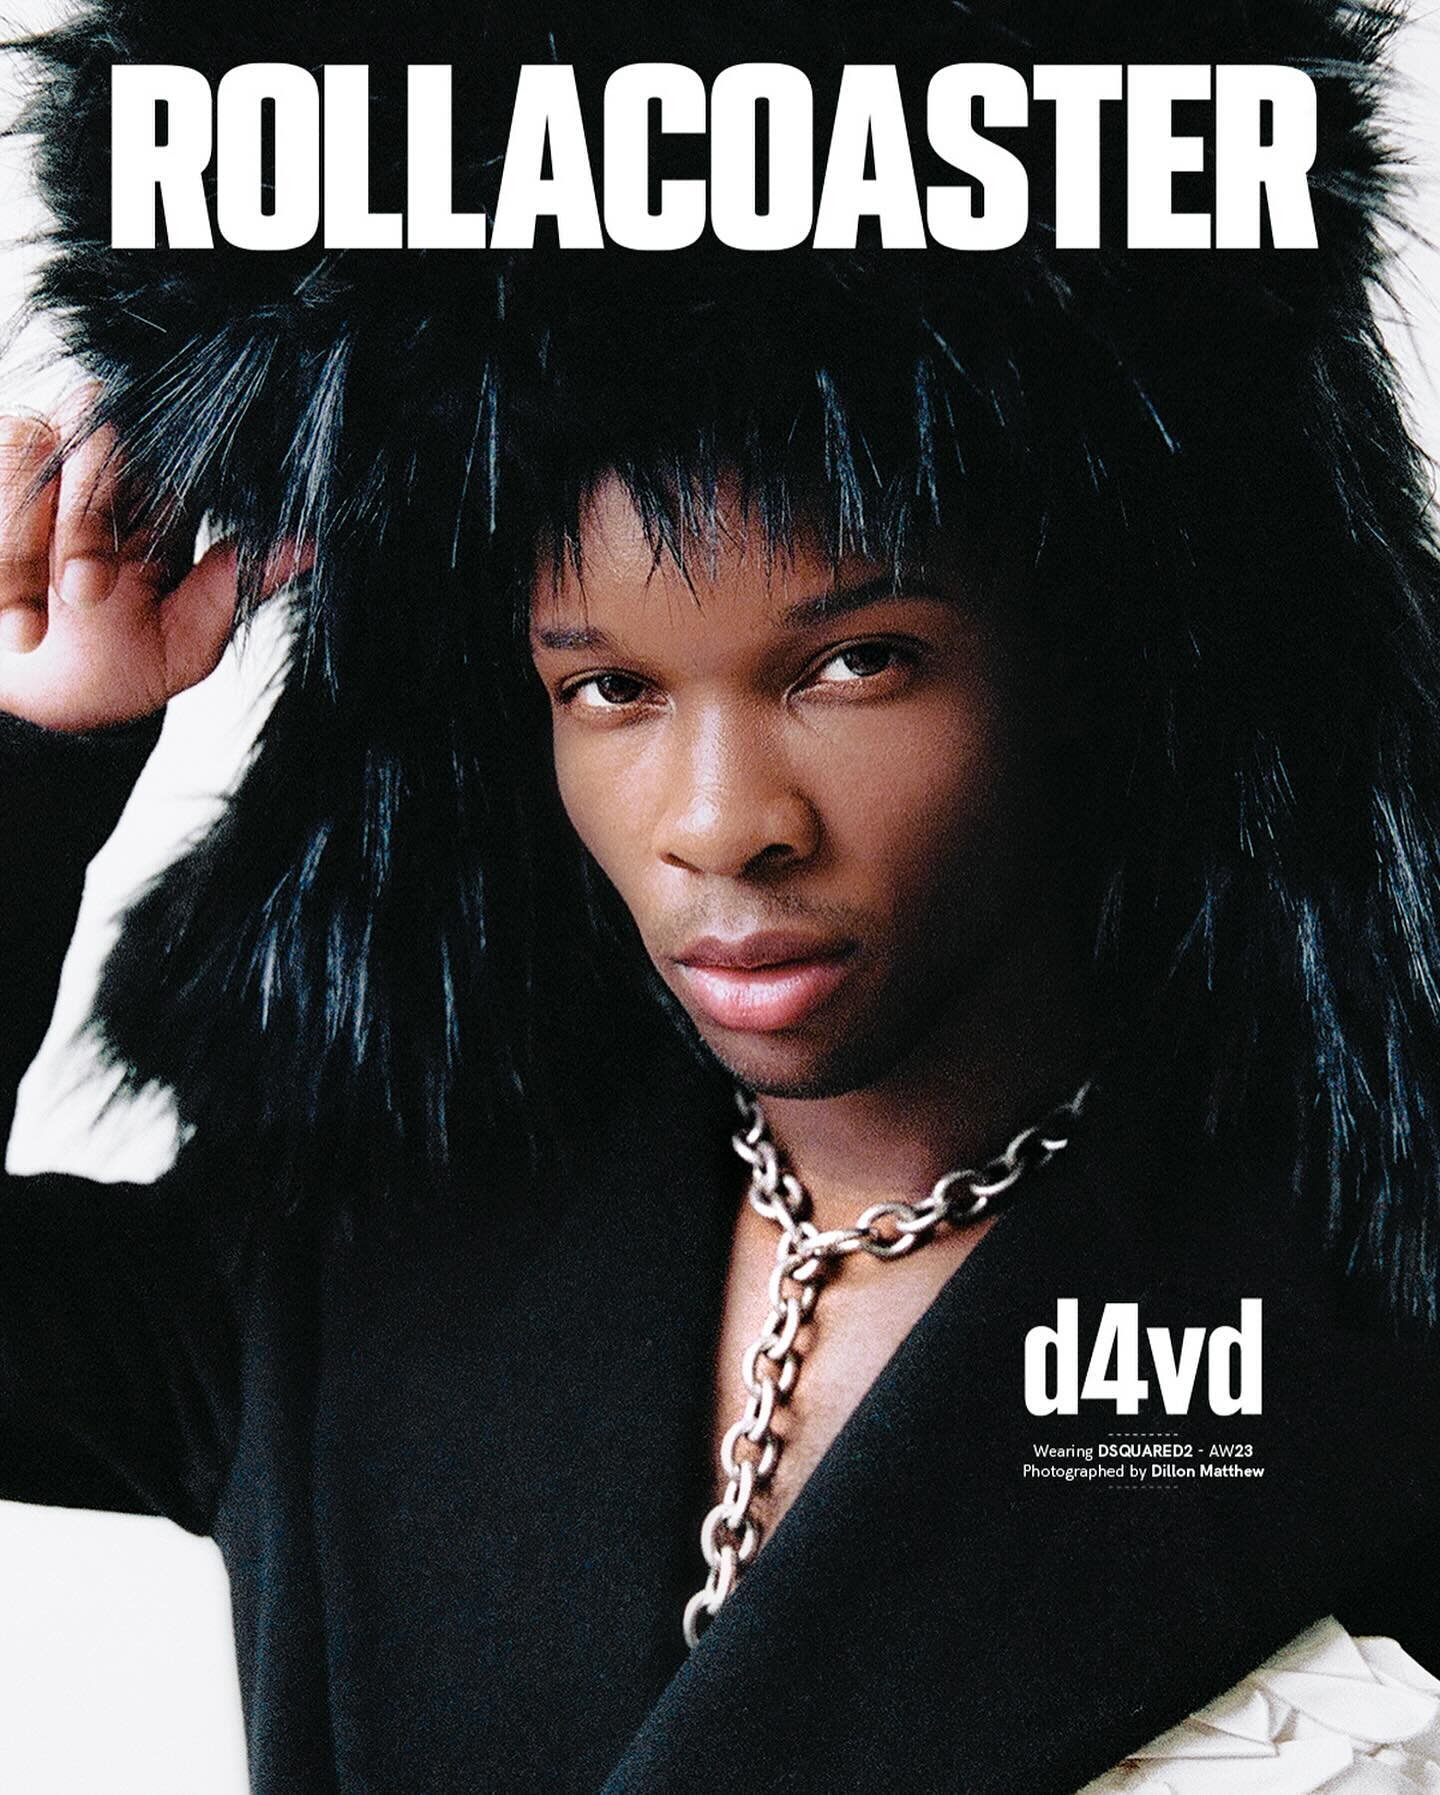 @d4vddd for the cover of Rollacoaster Magazine! 

Photography by @dillonmatthewc
Photo Assist: @mitali13 &amp; @ninaezul 
Styling by @jamie__ortega
Words by @ellaxwest
Editorial Director @charlottejmorton
Editor @ellaxwest
Art Director @Harry_conor
P